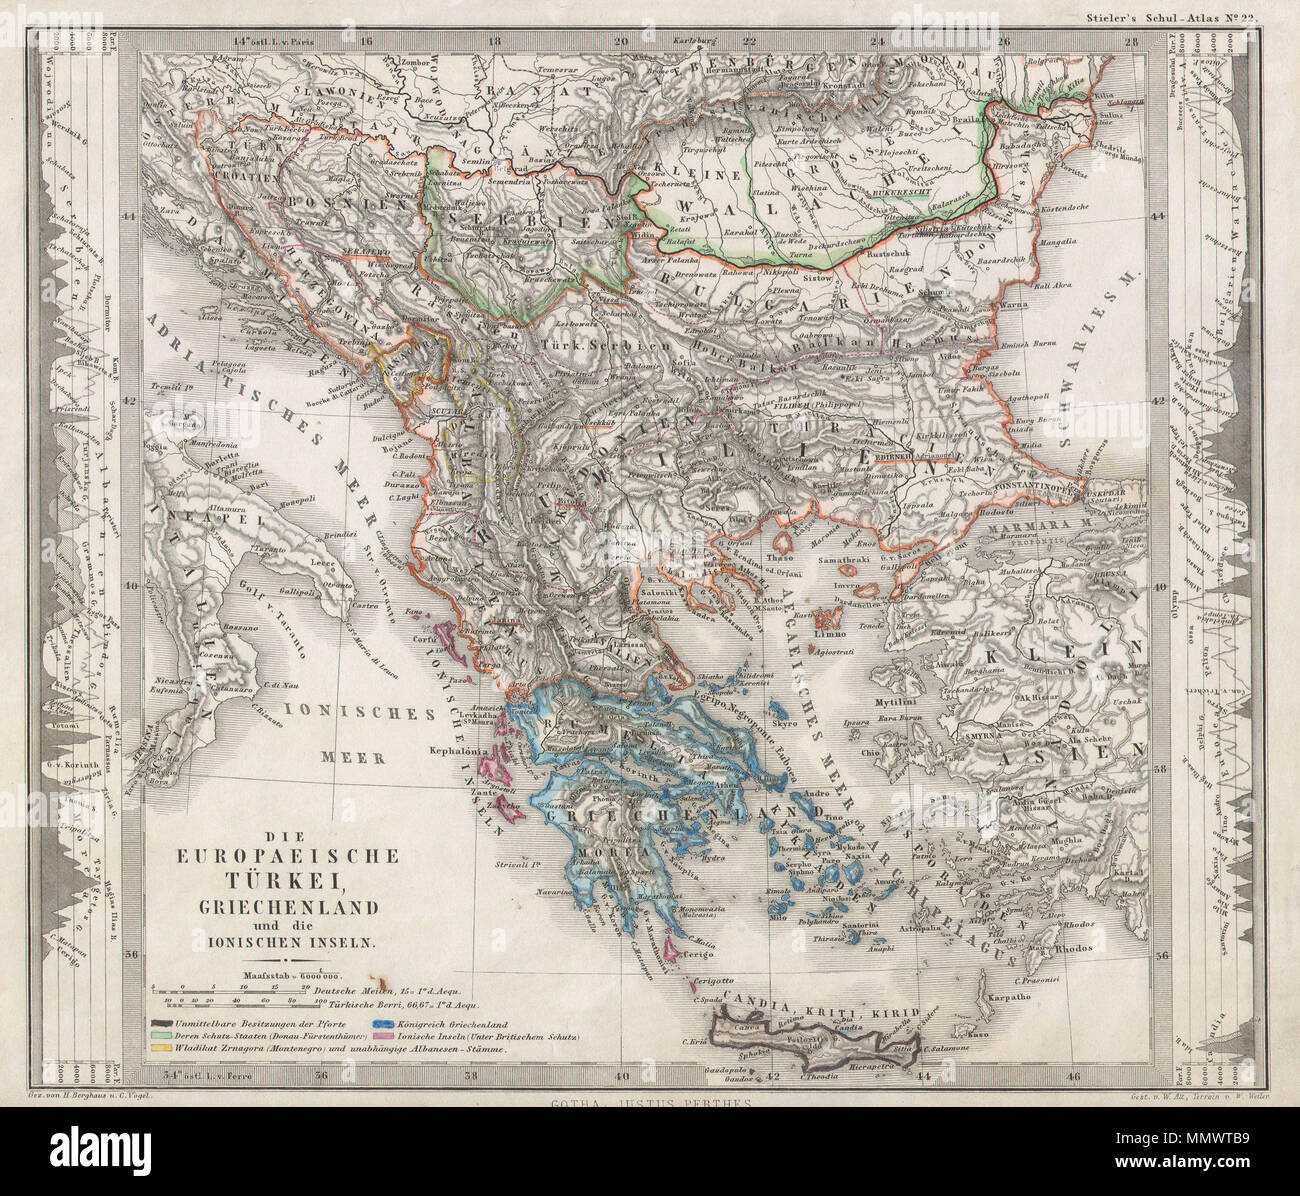 .  English: This fascinating 1862 map by Justus Perthes and Stieler depicts Greece, the Balkans, parts of Turkey, and the islands of the Adriatic as far south as Crete or Candia. Extends as far north as Croatia, Bosnia, Serbia, Bulgaria, Rumania and Macedonia. In a cartographic flourish unique to Perthes, elevation profile charts decorate the right and left borders of the map. Unlike other cartographic publishers of the period, the Justus Perthes firm, did not transition to lithographic printing techniques until the early 1870s. Instead, all of his maps are copper plate engravings and hence of Stock Photo